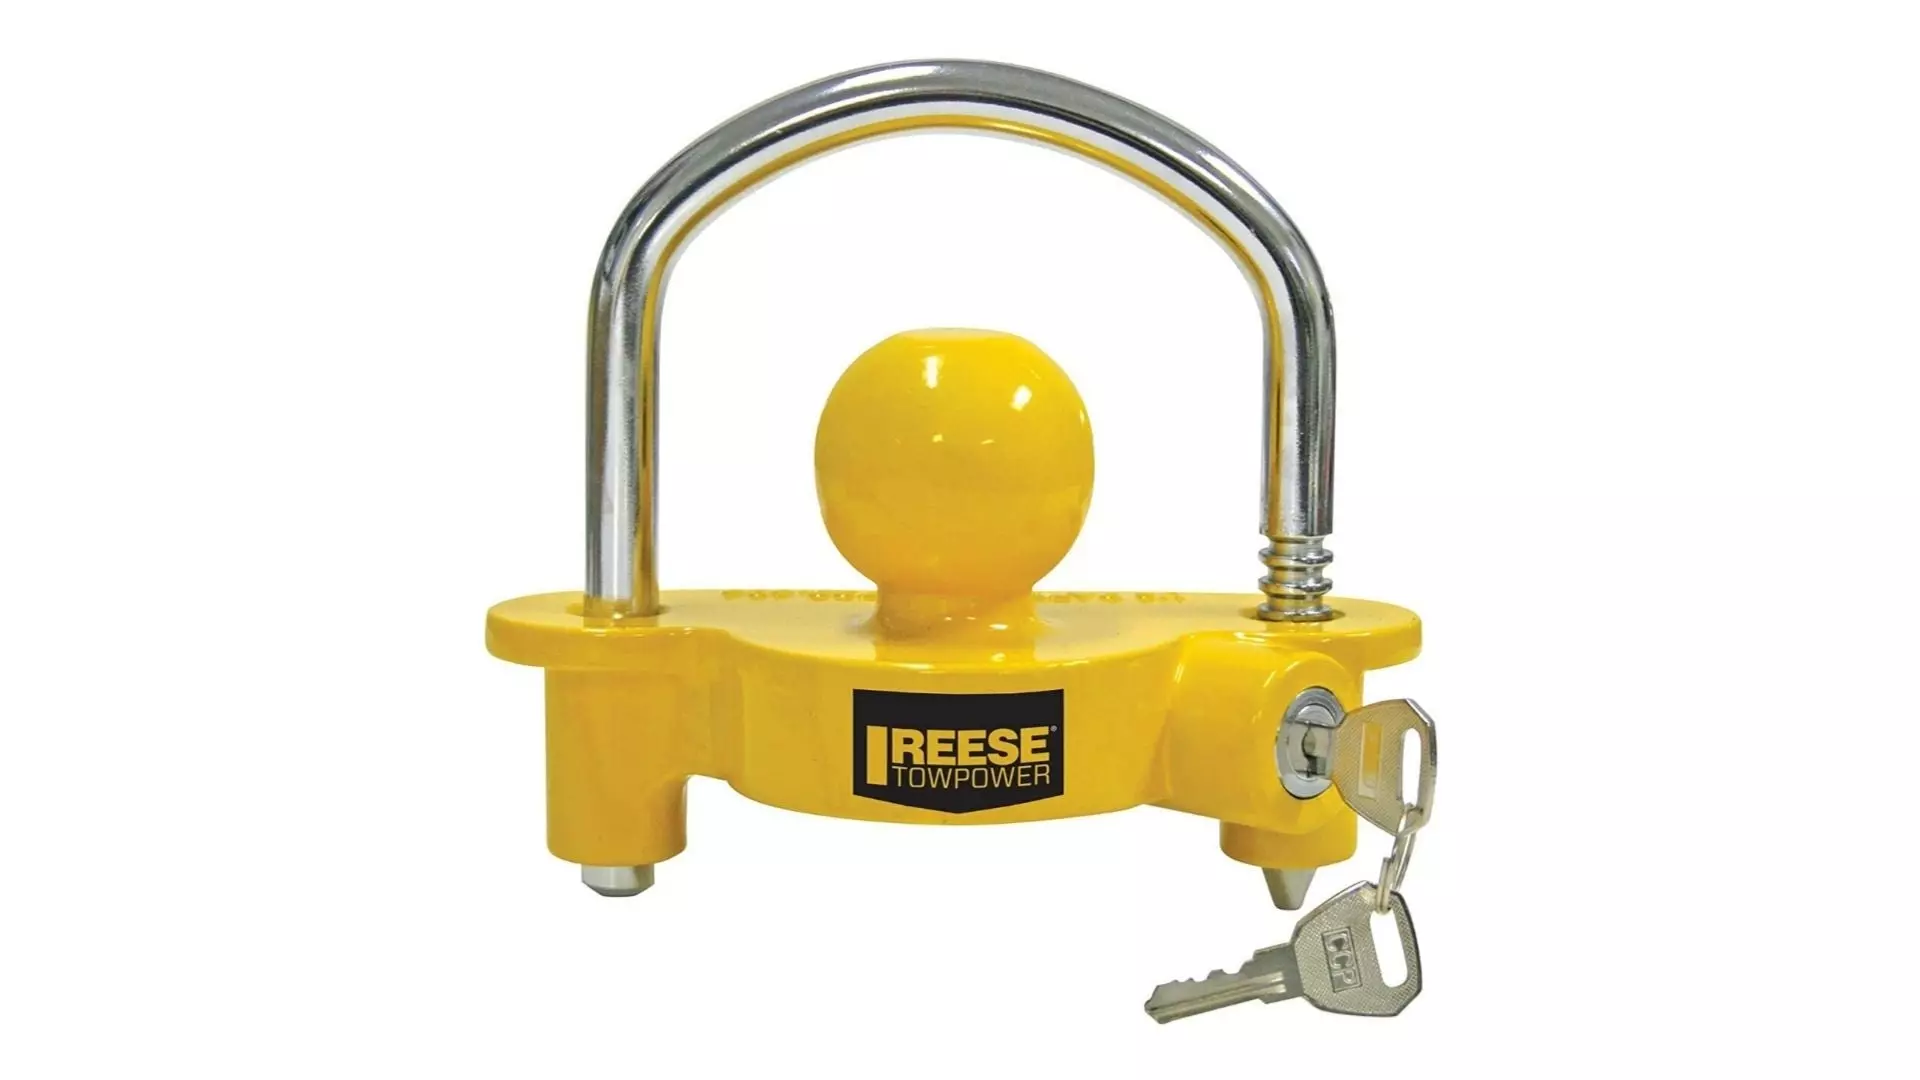 Reese Towpower Universal Trailer Hitch Lock